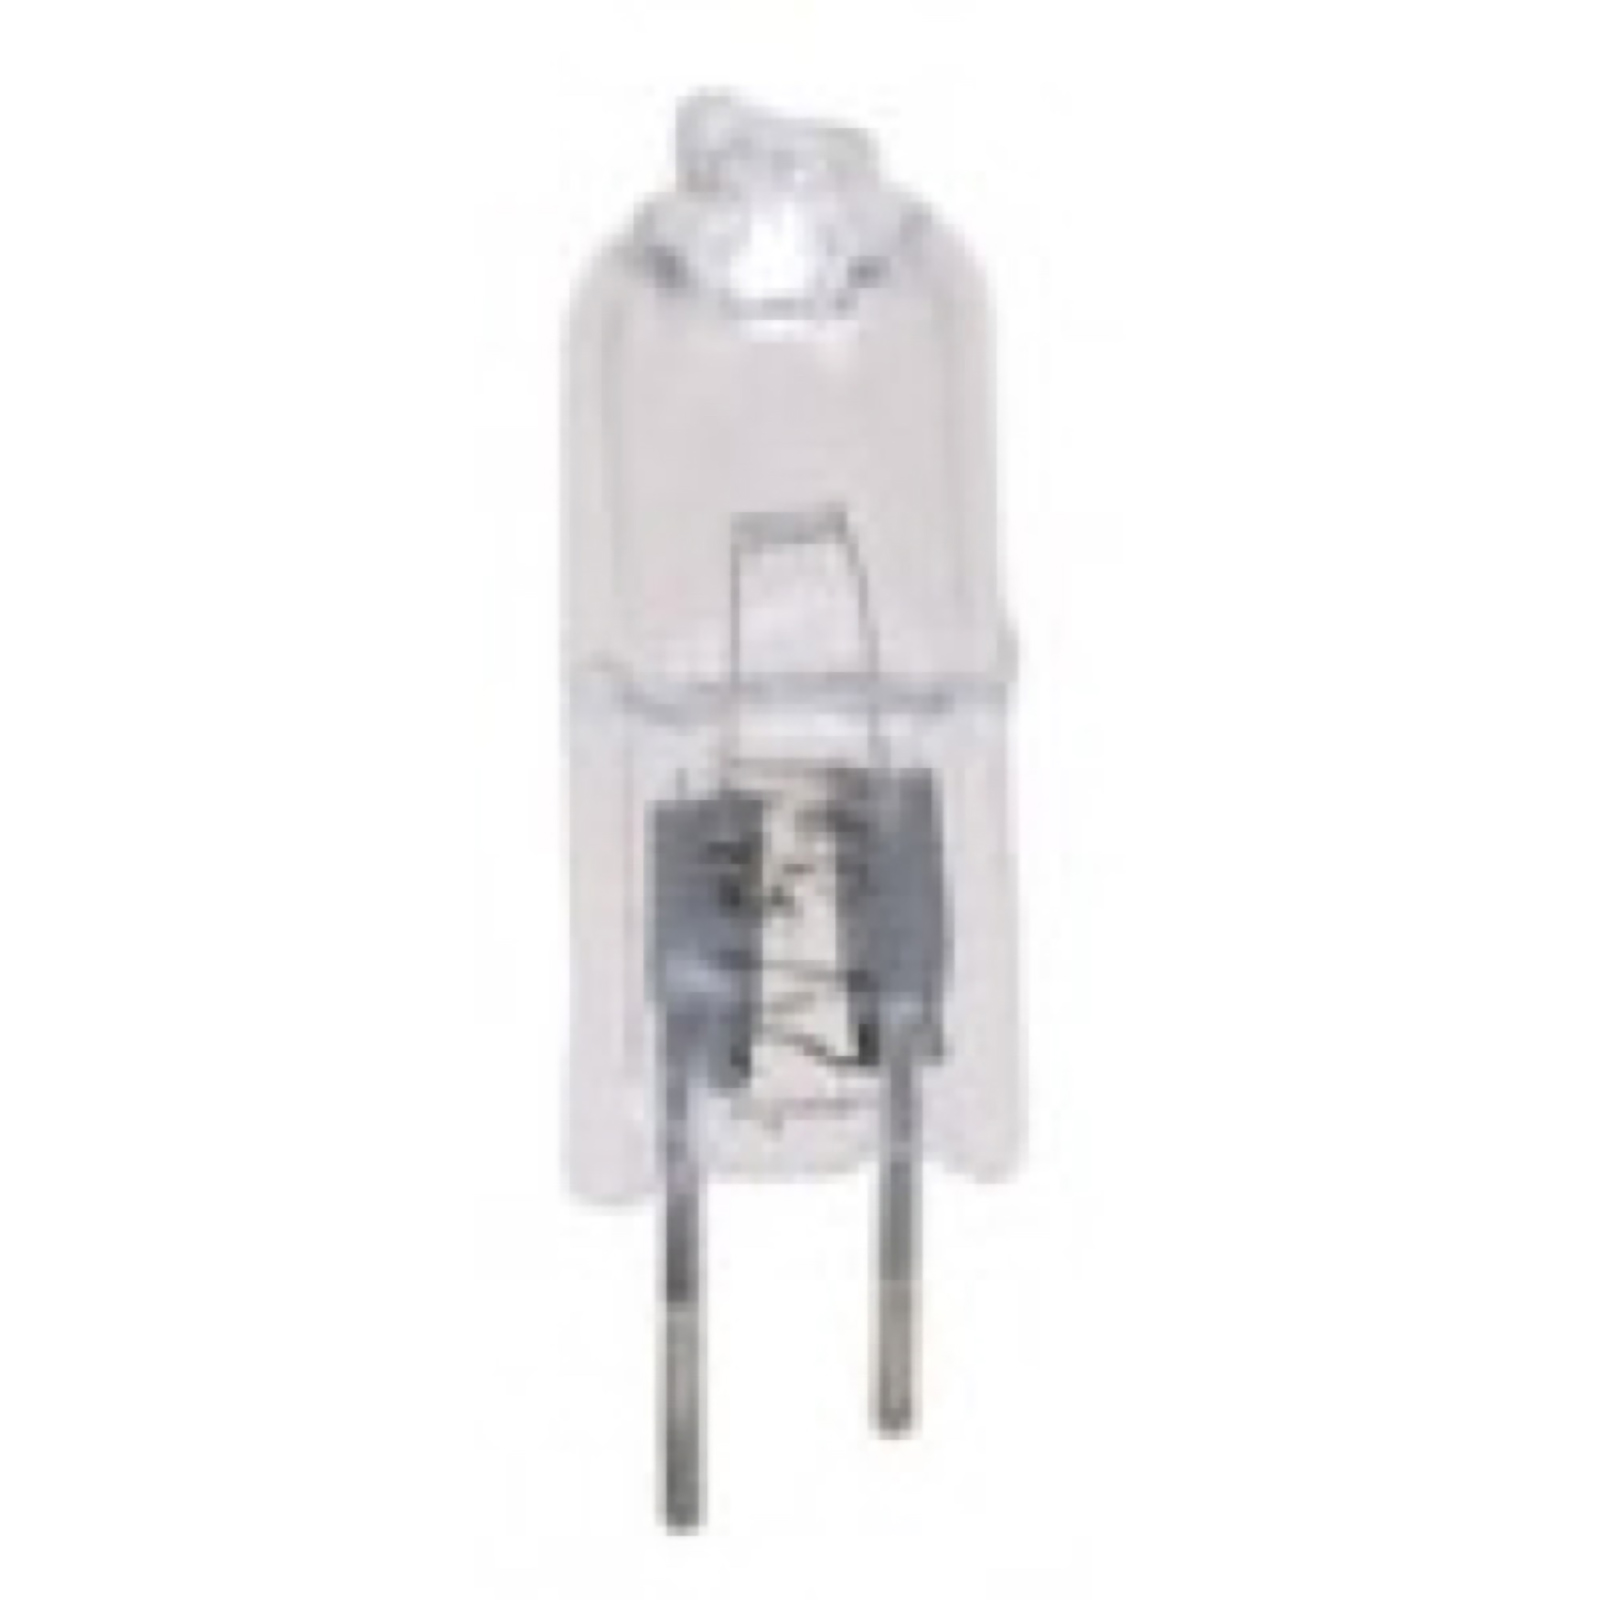 EDGEWATER PARTS 8204670 Halogen Bulb for Whirlpool Microwave